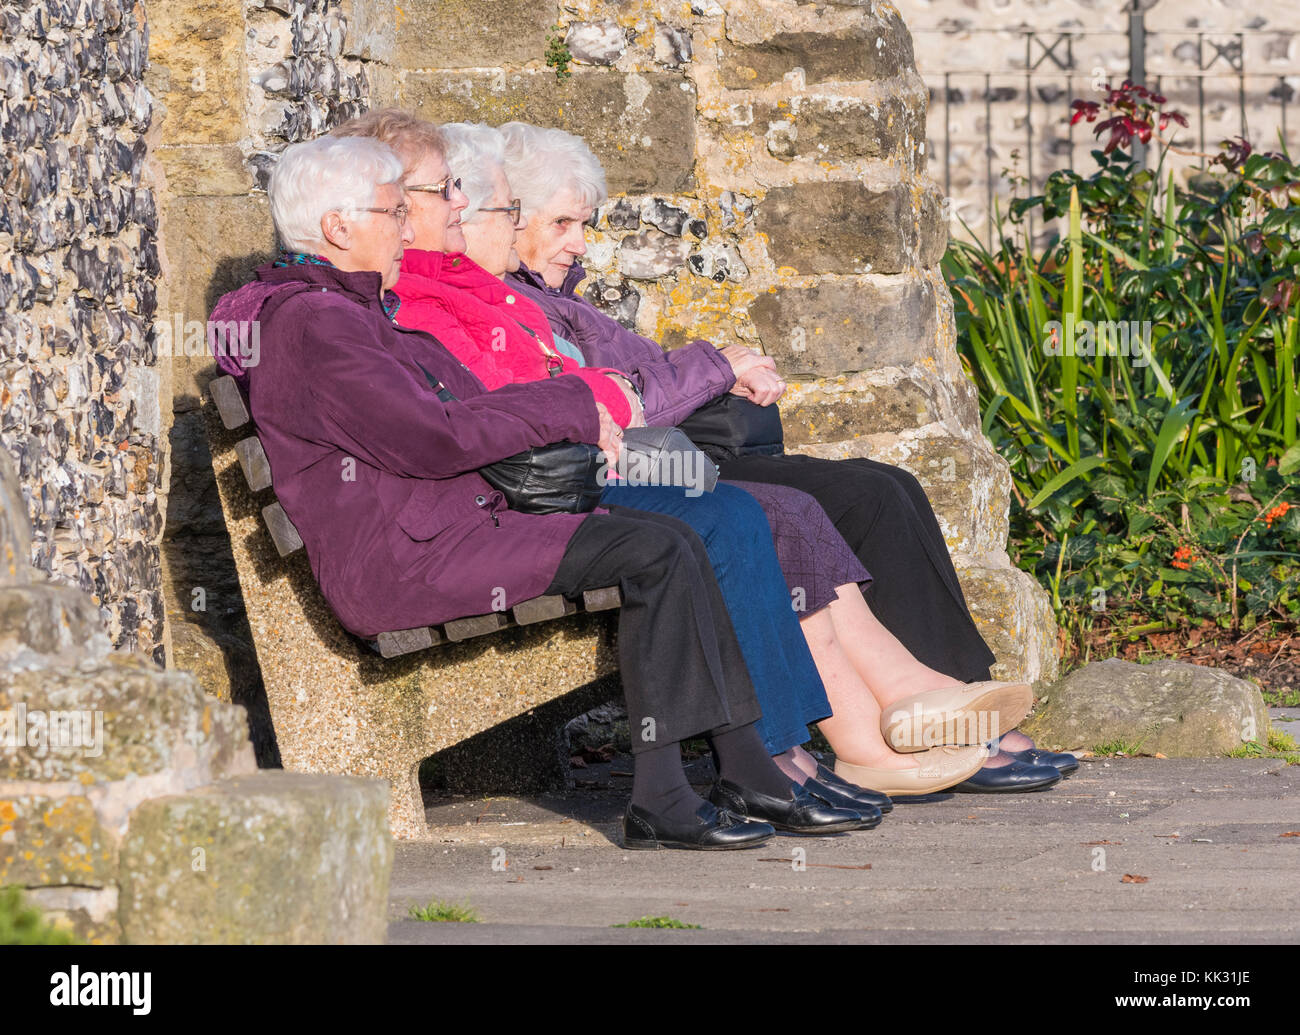 Group of 4 elderly women sitting outside on a bench in warm clothing in Autumn in the UK. Stock Photo